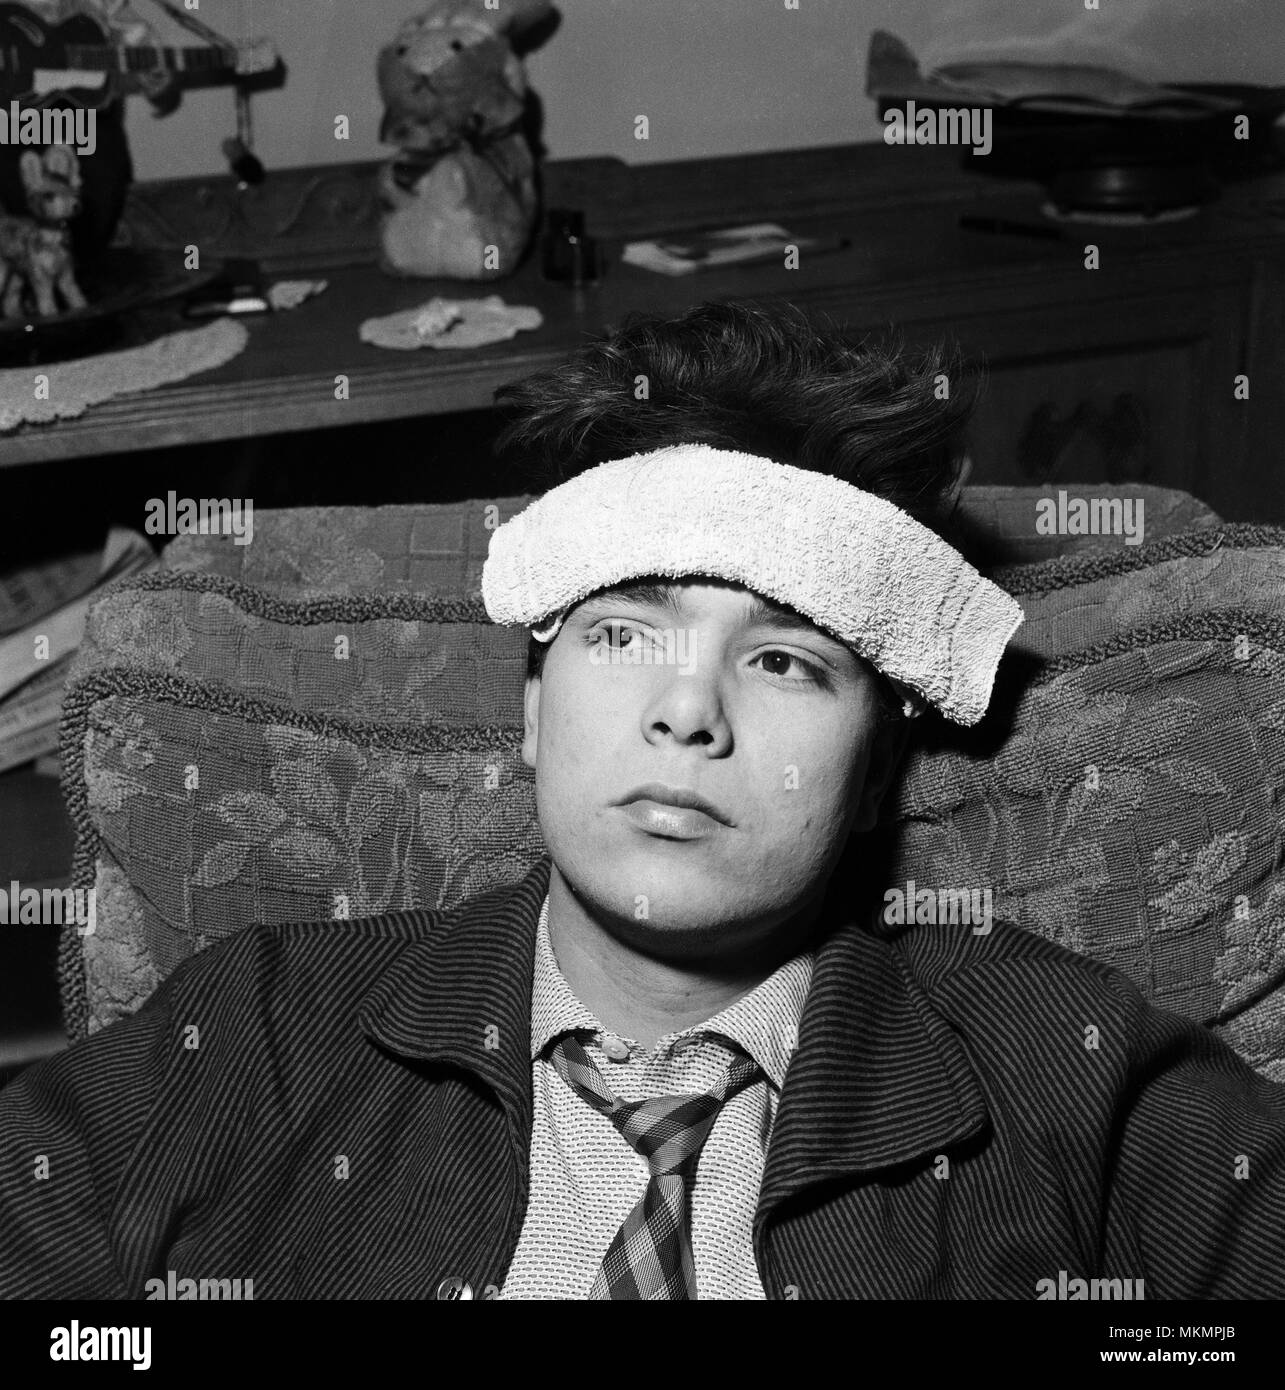 Rock and roll singer Cliff Richard who was attacked this evening whilst performing at the Lyceum dance hall, London. Pictured at his home. 4th February 1959. Stock Photo